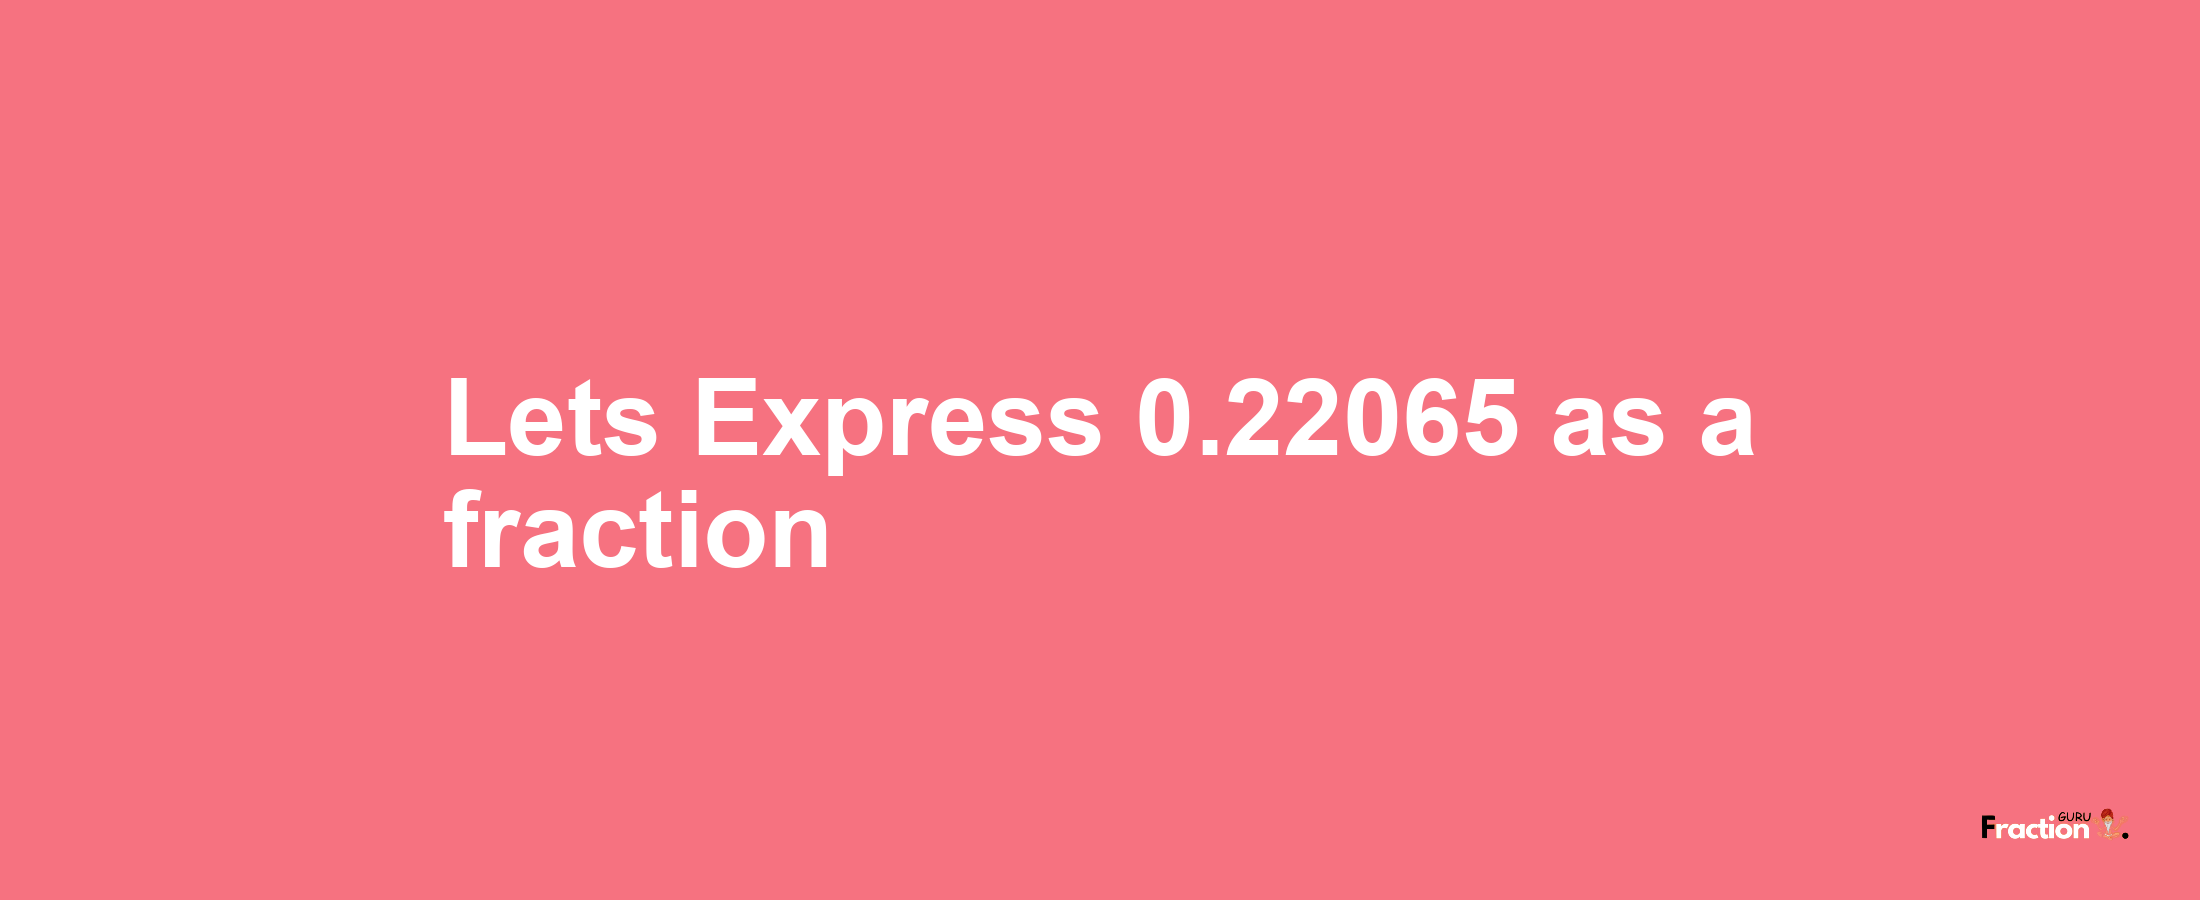 Lets Express 0.22065 as afraction